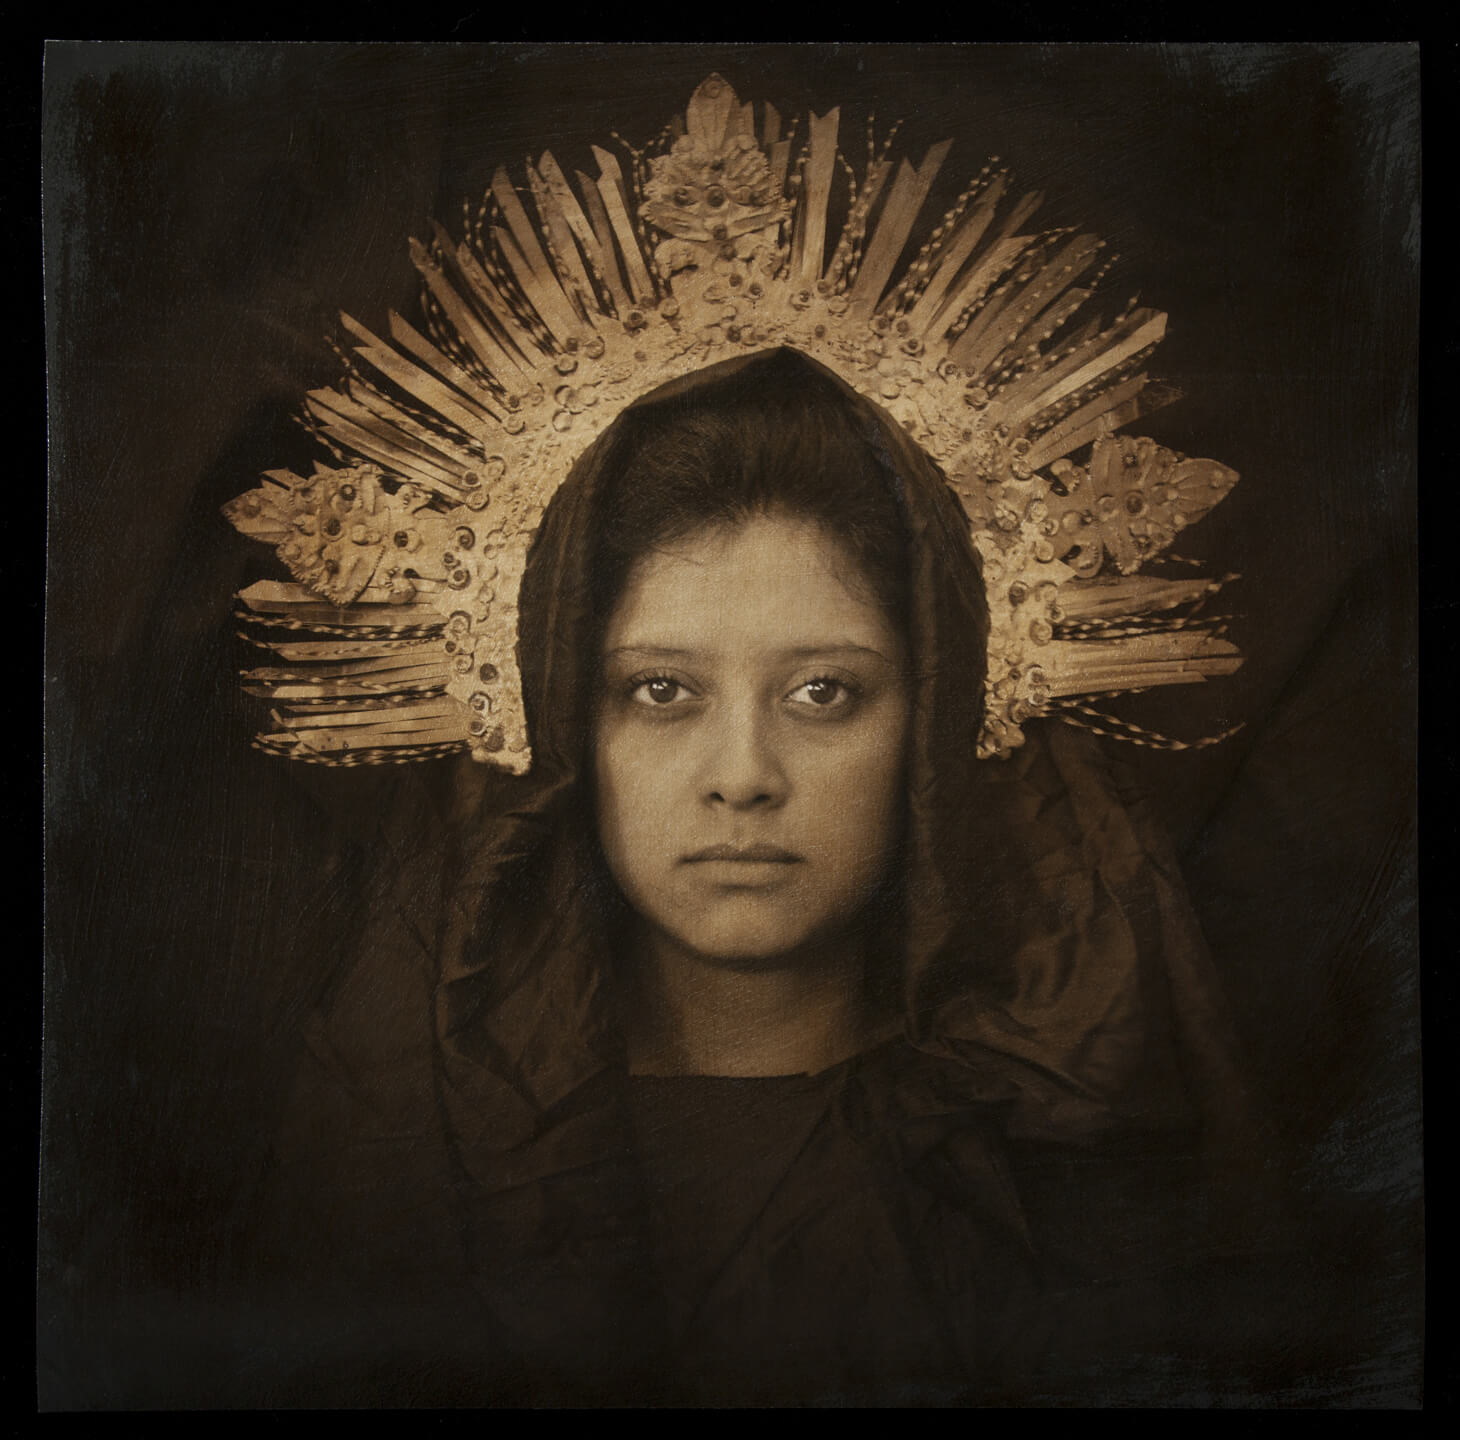 Luis González Palma - Virginal, 2011, hand-painted photograph on Hahnemuhle watercolor paper, 36" x 36", edition of 7